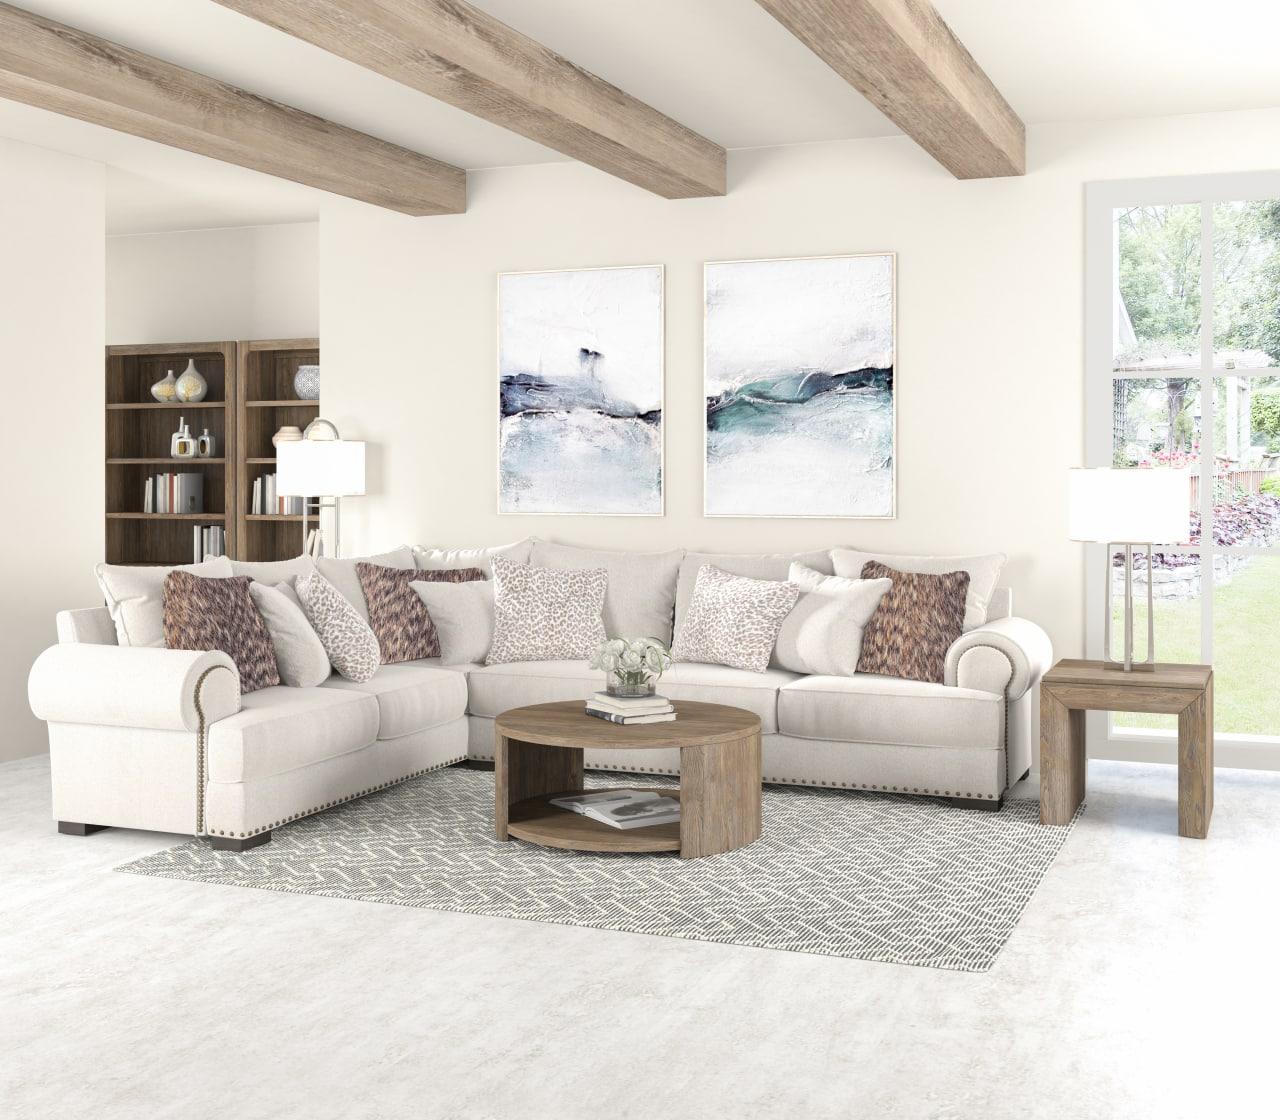 Modern, Traditional Sectional Sofa and Coffee Table Scully Berens & Stockyard 780529-5012C7S2-3pcs in Brown, Beige Fabric